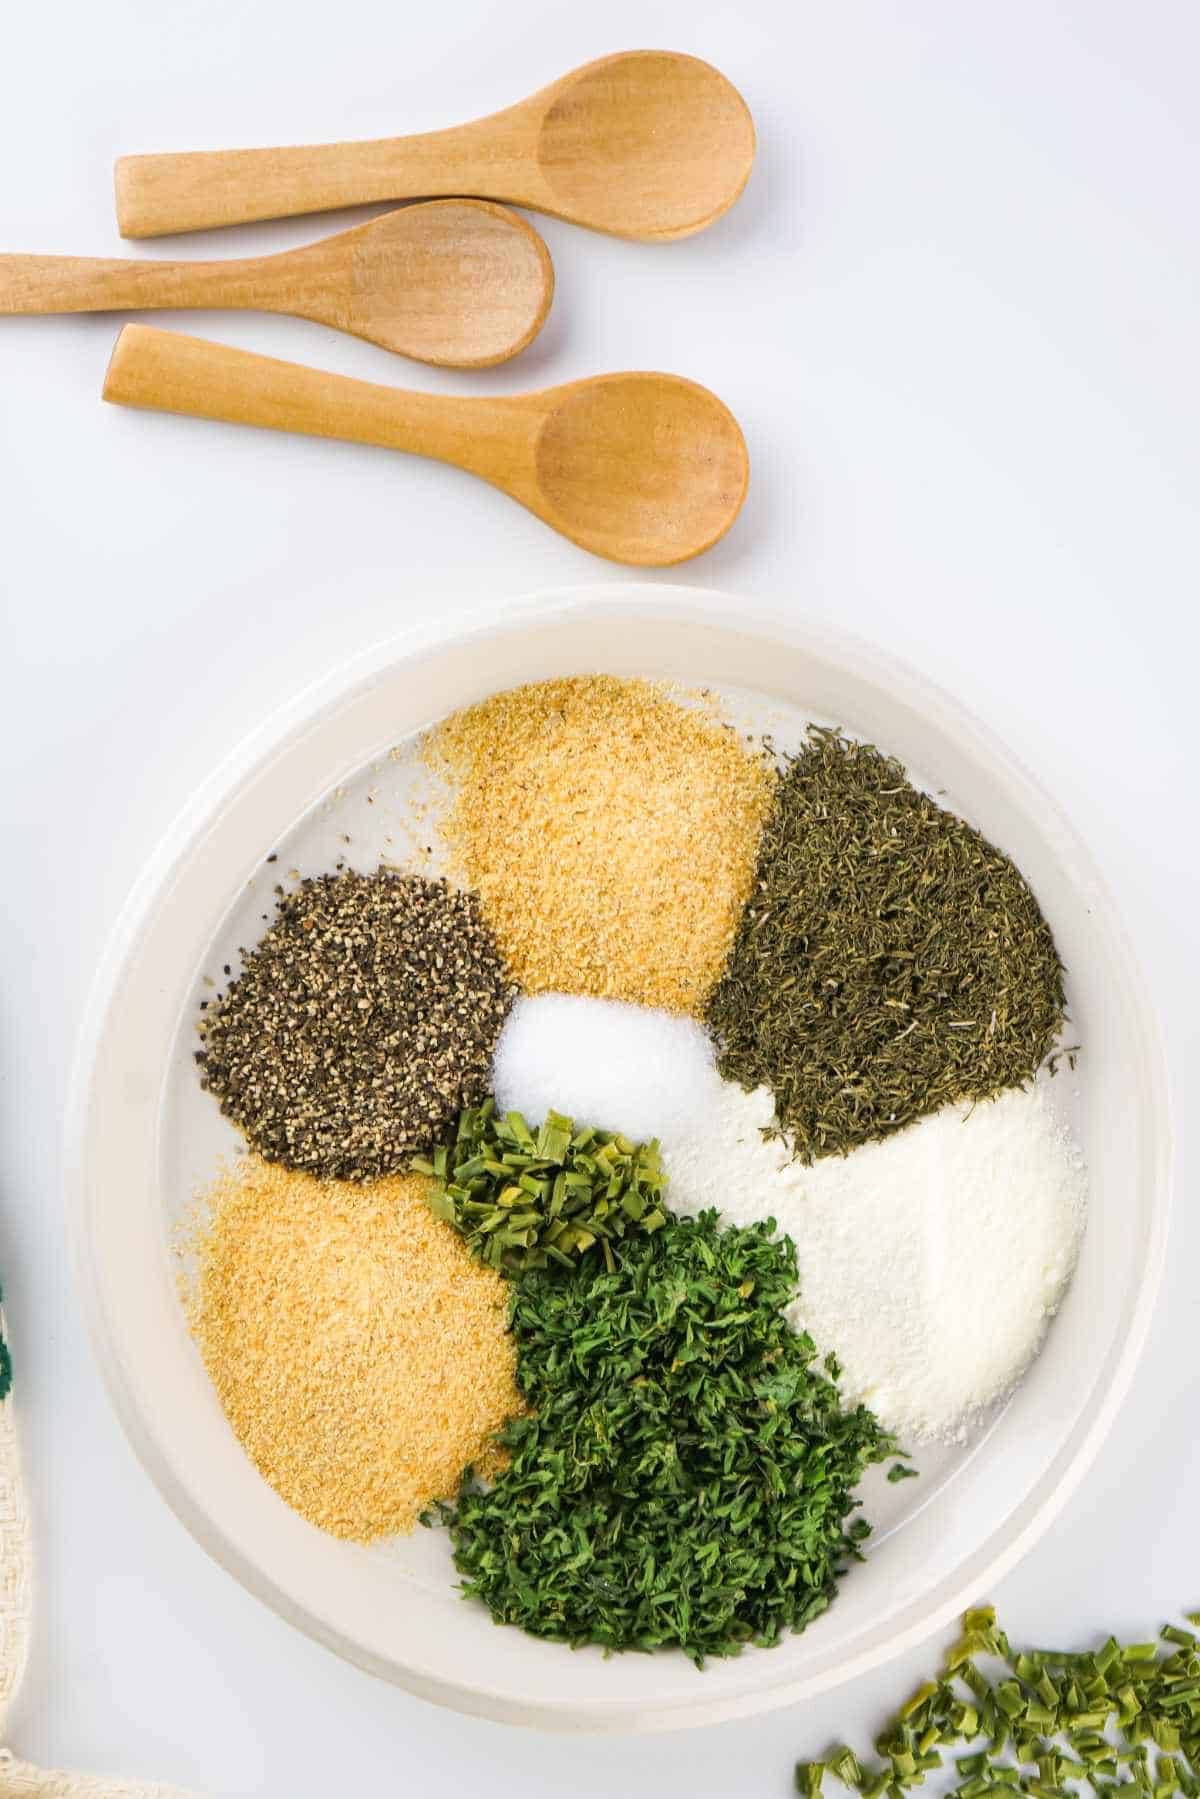 shallow bowl filled with small piles of colorful green, yellow, and white dried herbs, spices, and ingredients.